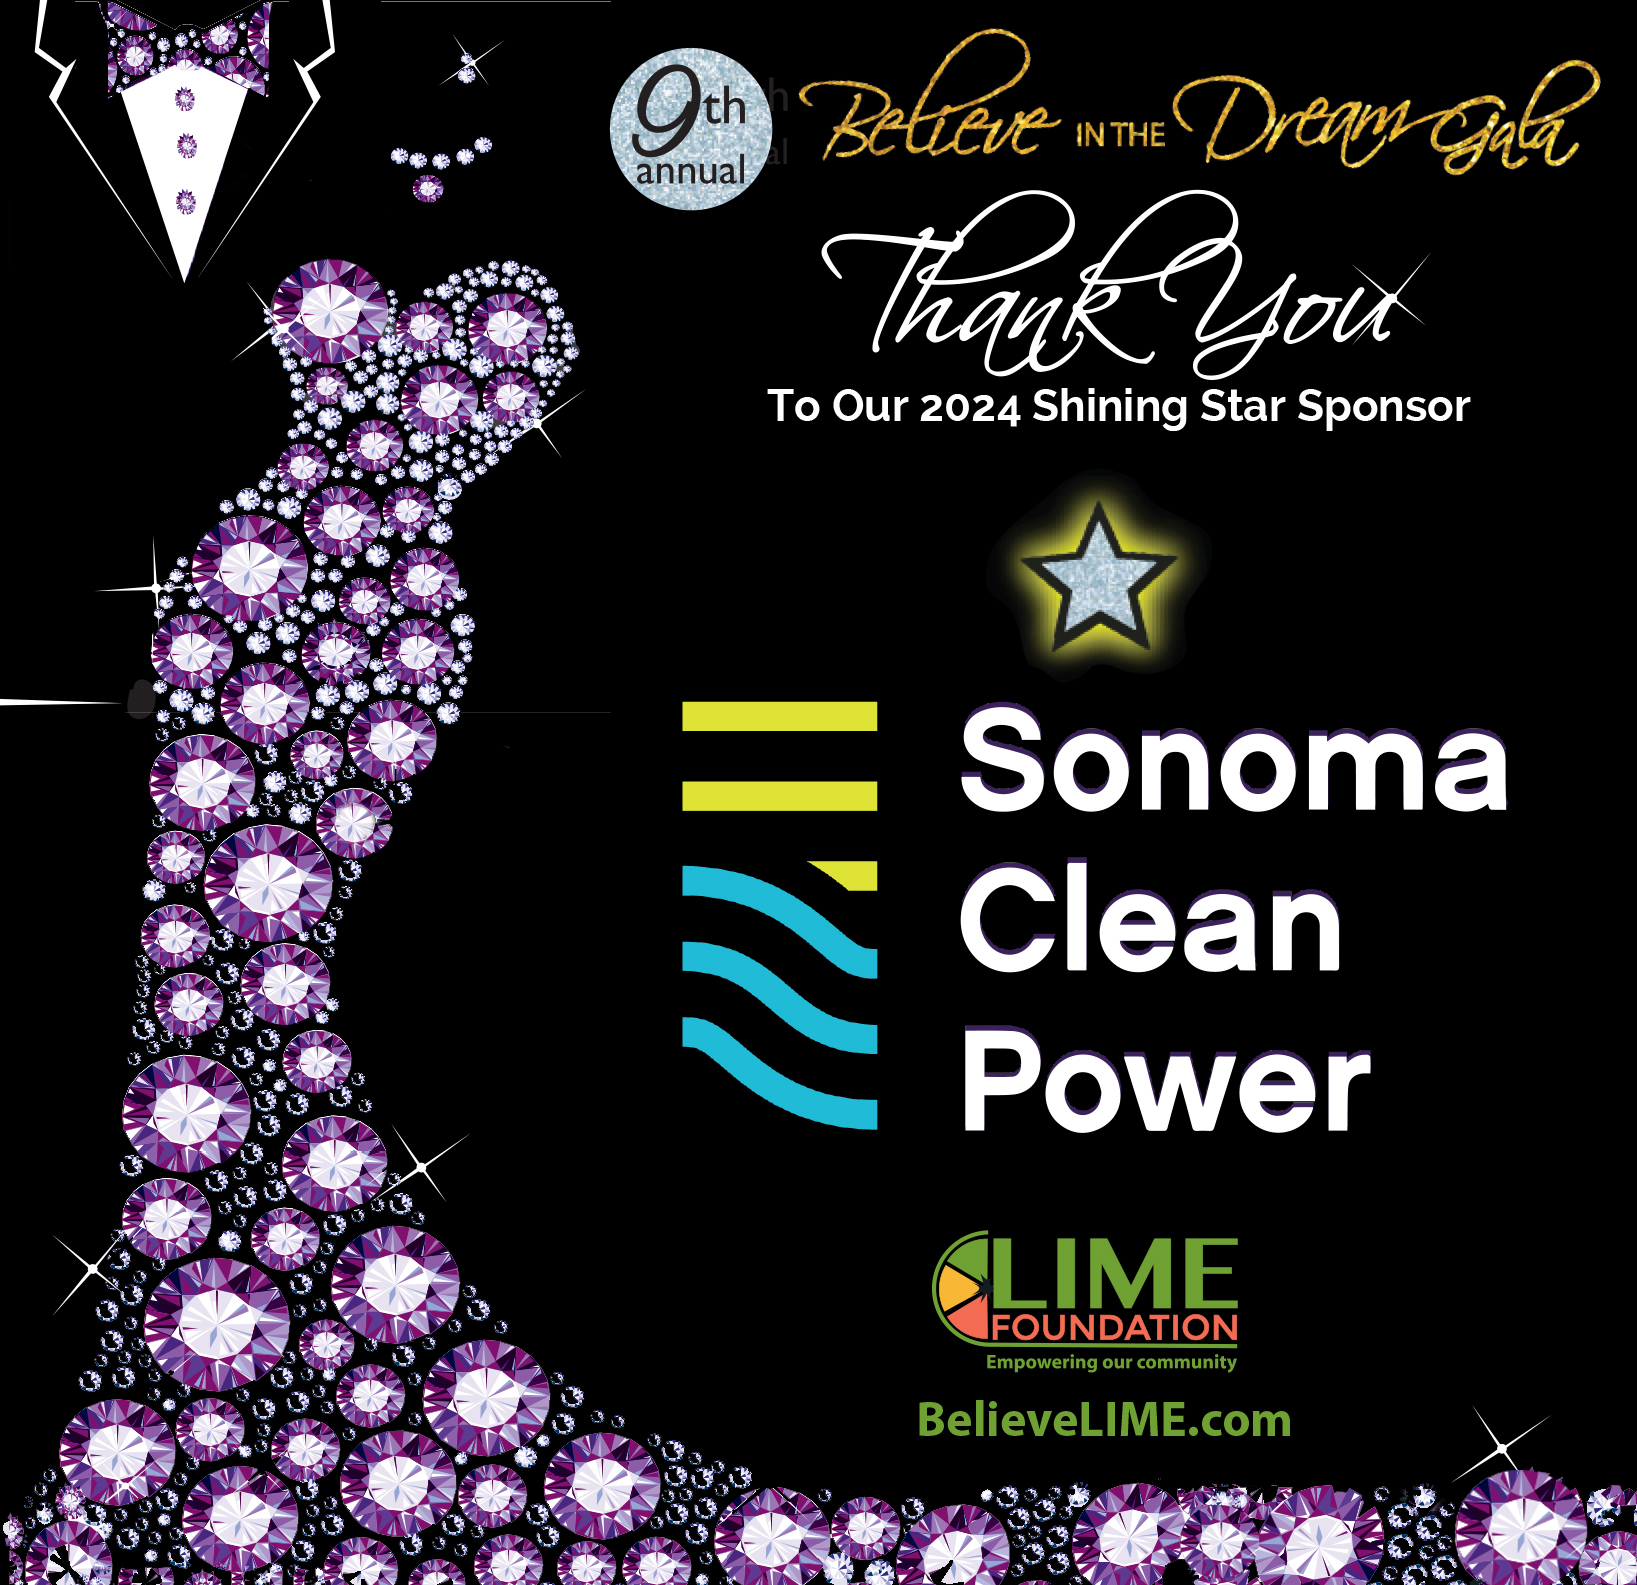 Graphic for a gala event featuring a sparkling dress design, text thanking sponsors Sonoma Clean Power and Lime Foundation, with the theme "Believe The Dream 2024", logos, and website addresses displayed